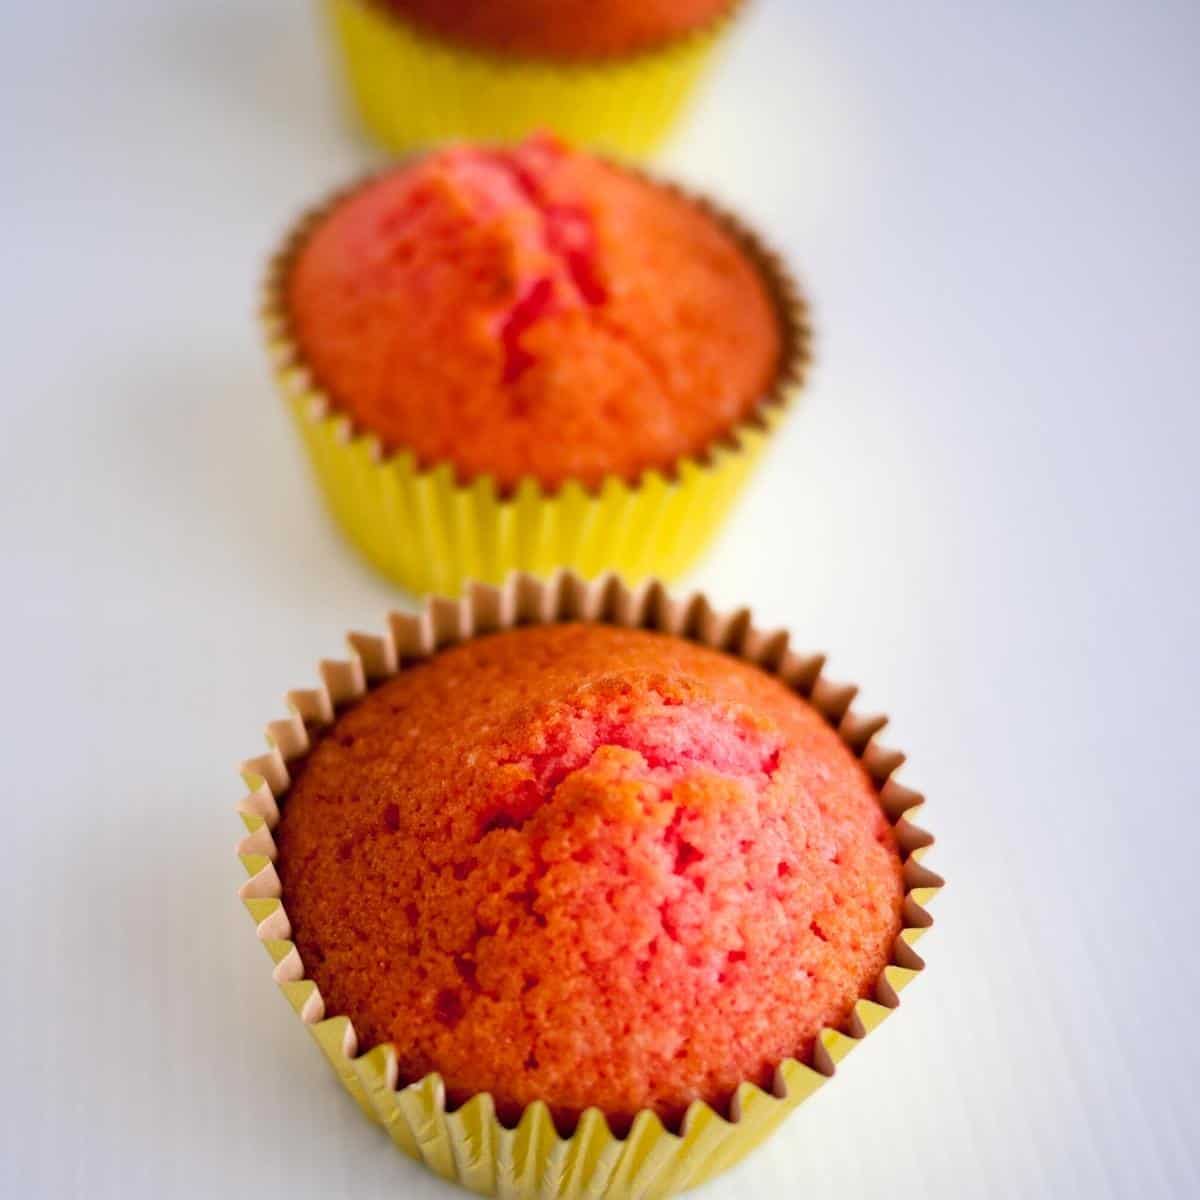 Fresh baked cupcakes in cupcake liners.